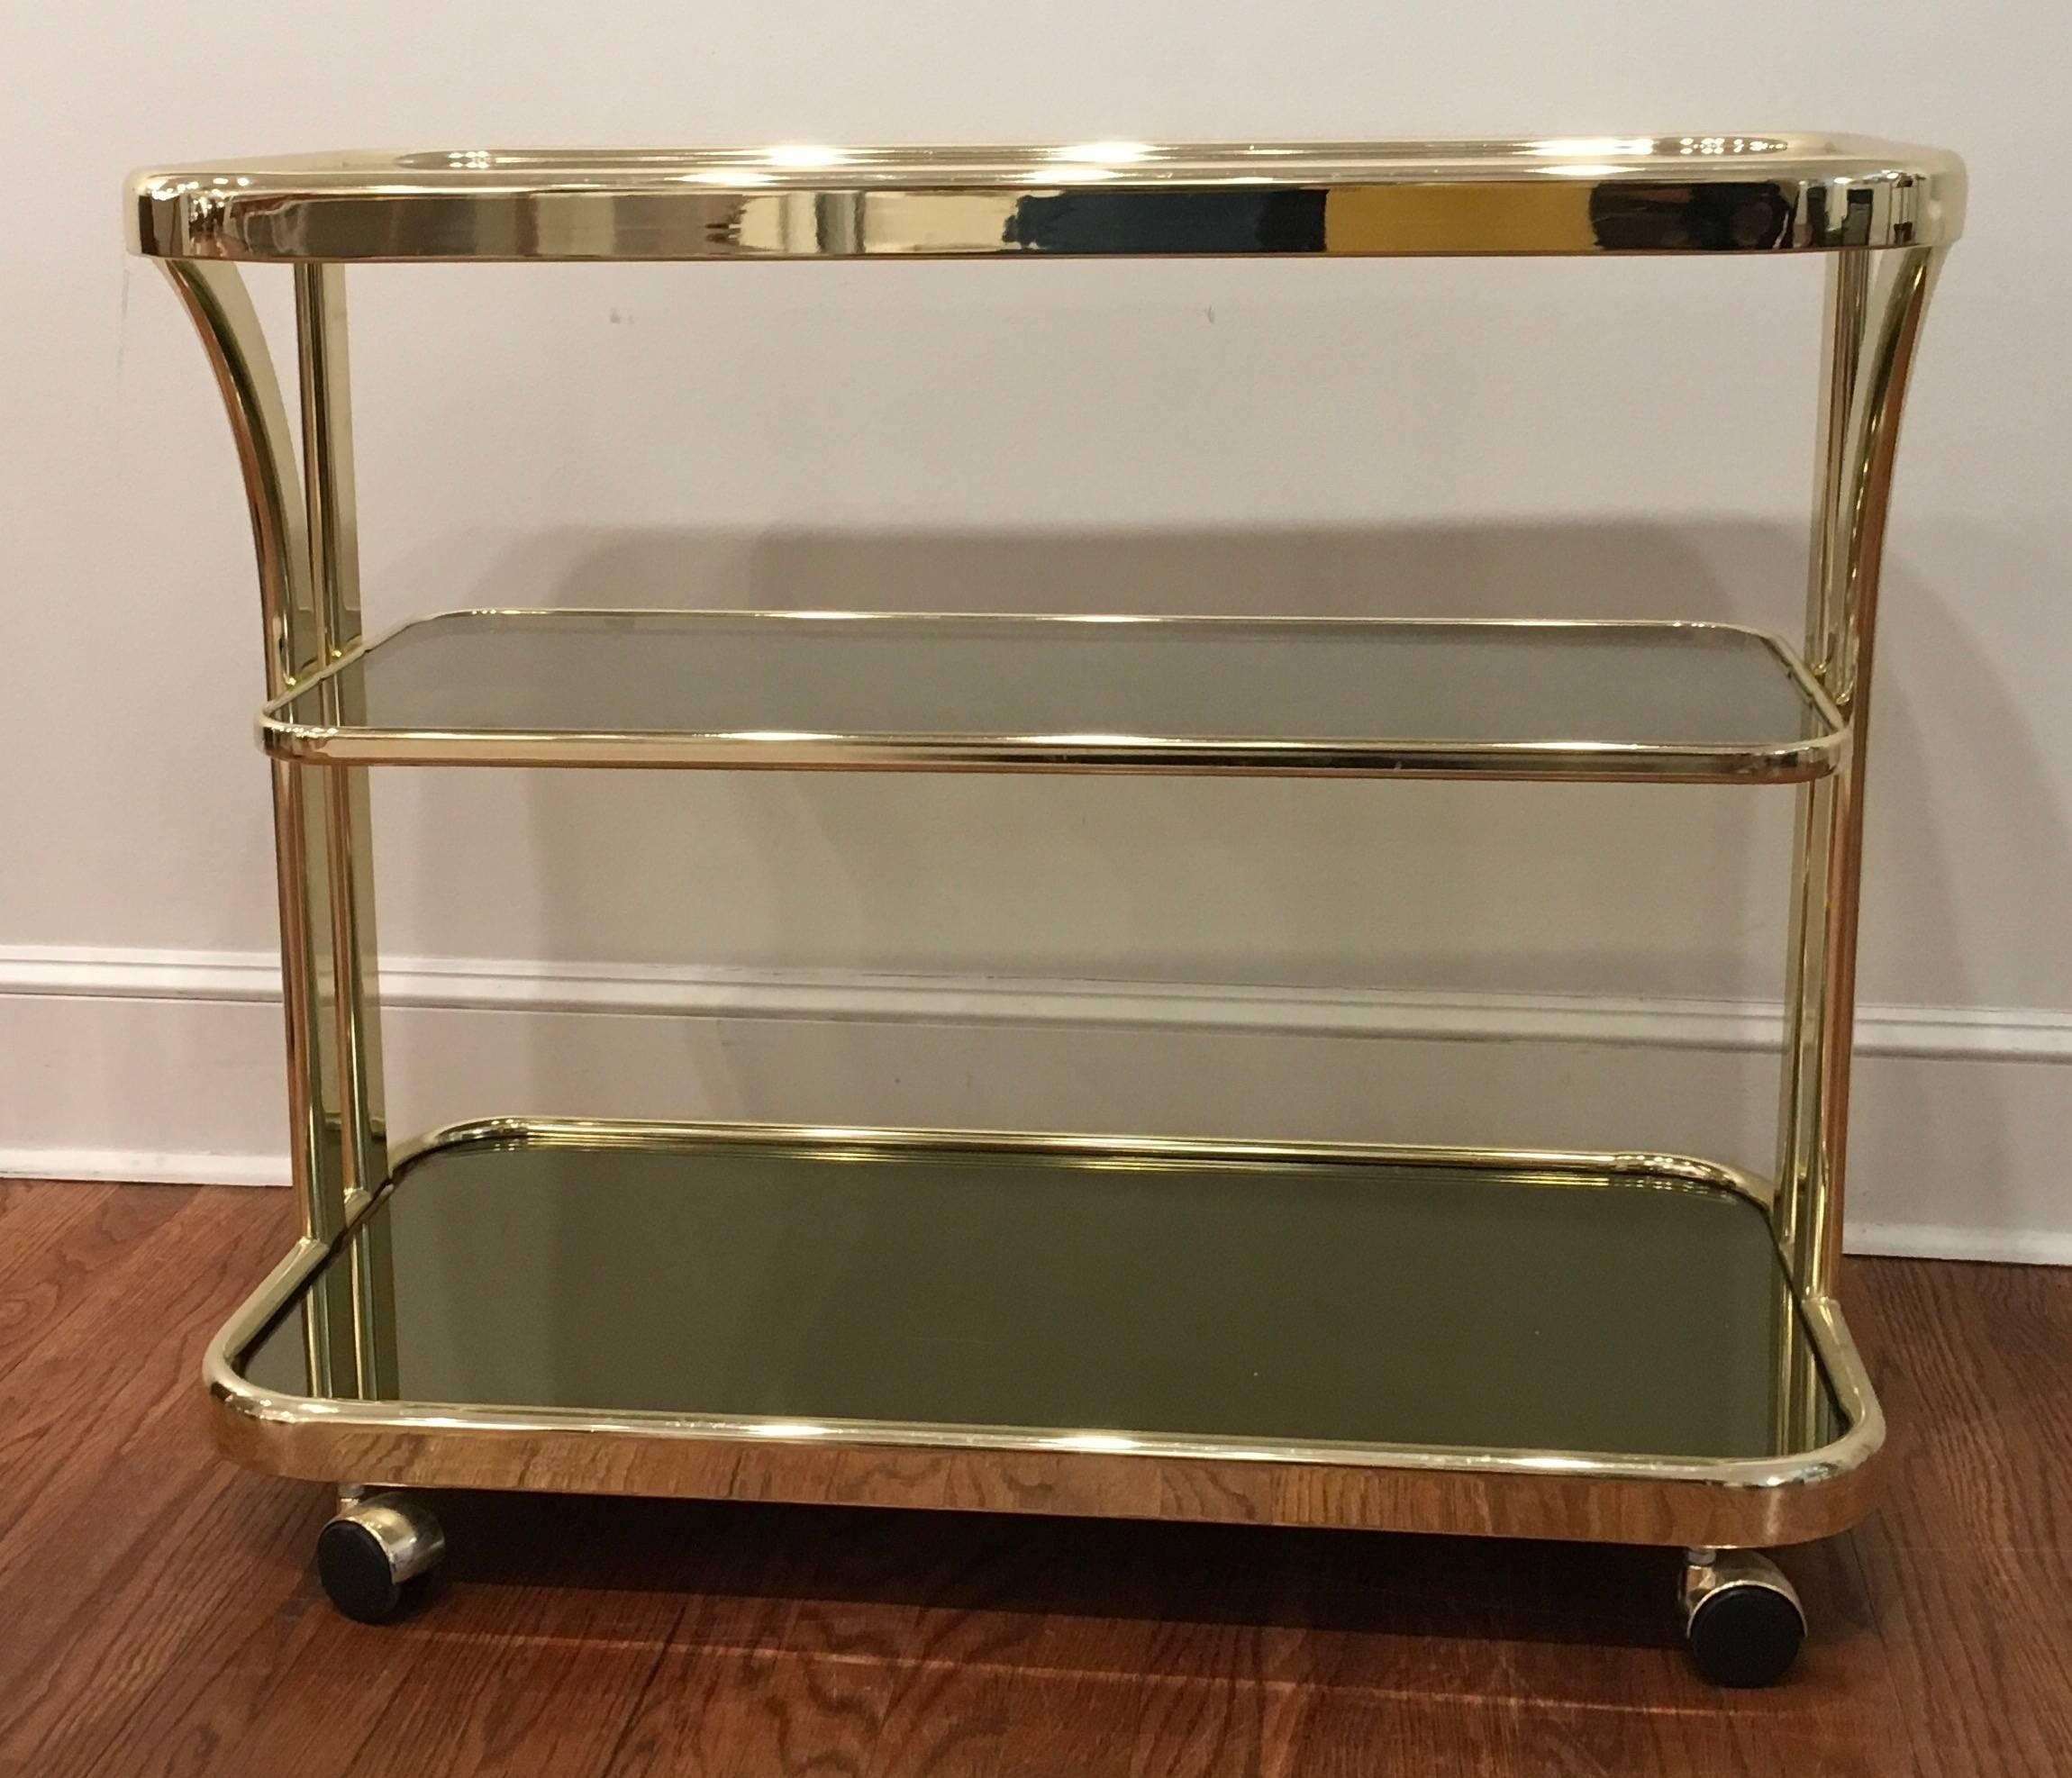 Morex Italian brass bar cart on castors with smoked glass for the two top shelves and mirrored glass on the bottom. Three tiered bar cart allows for great serving and storage.